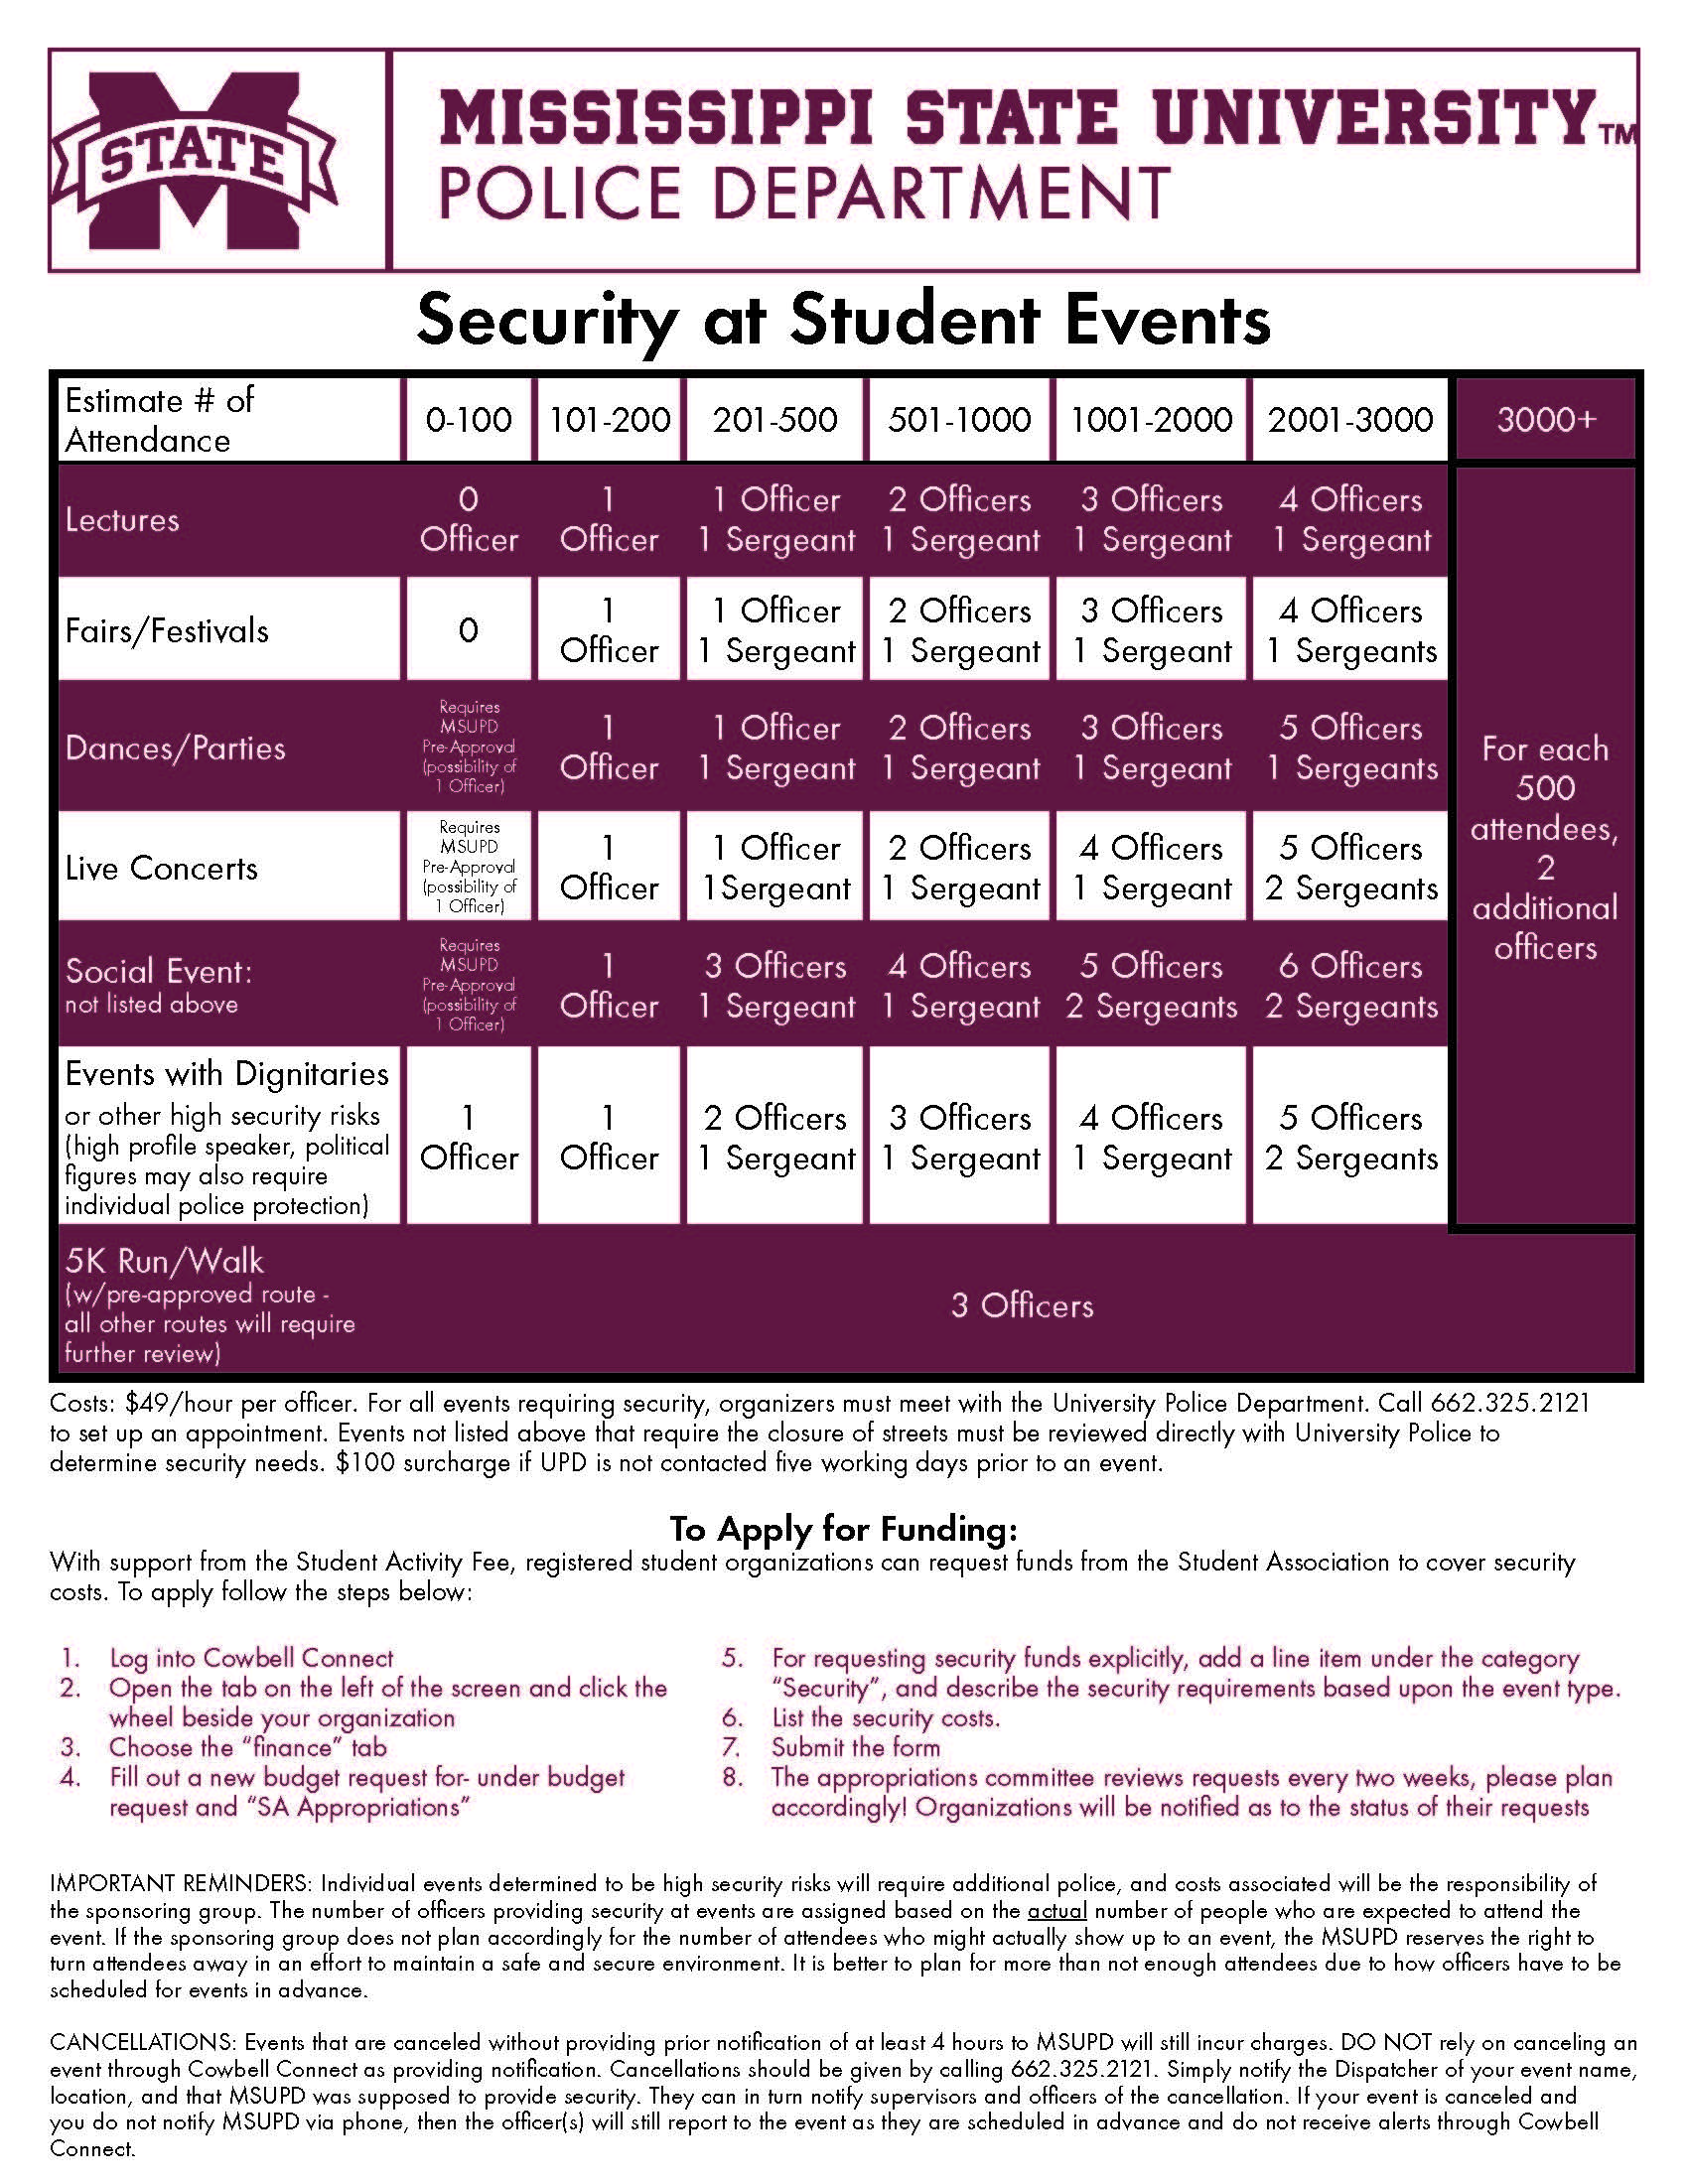 Pricing matrix for security at events on campus. 